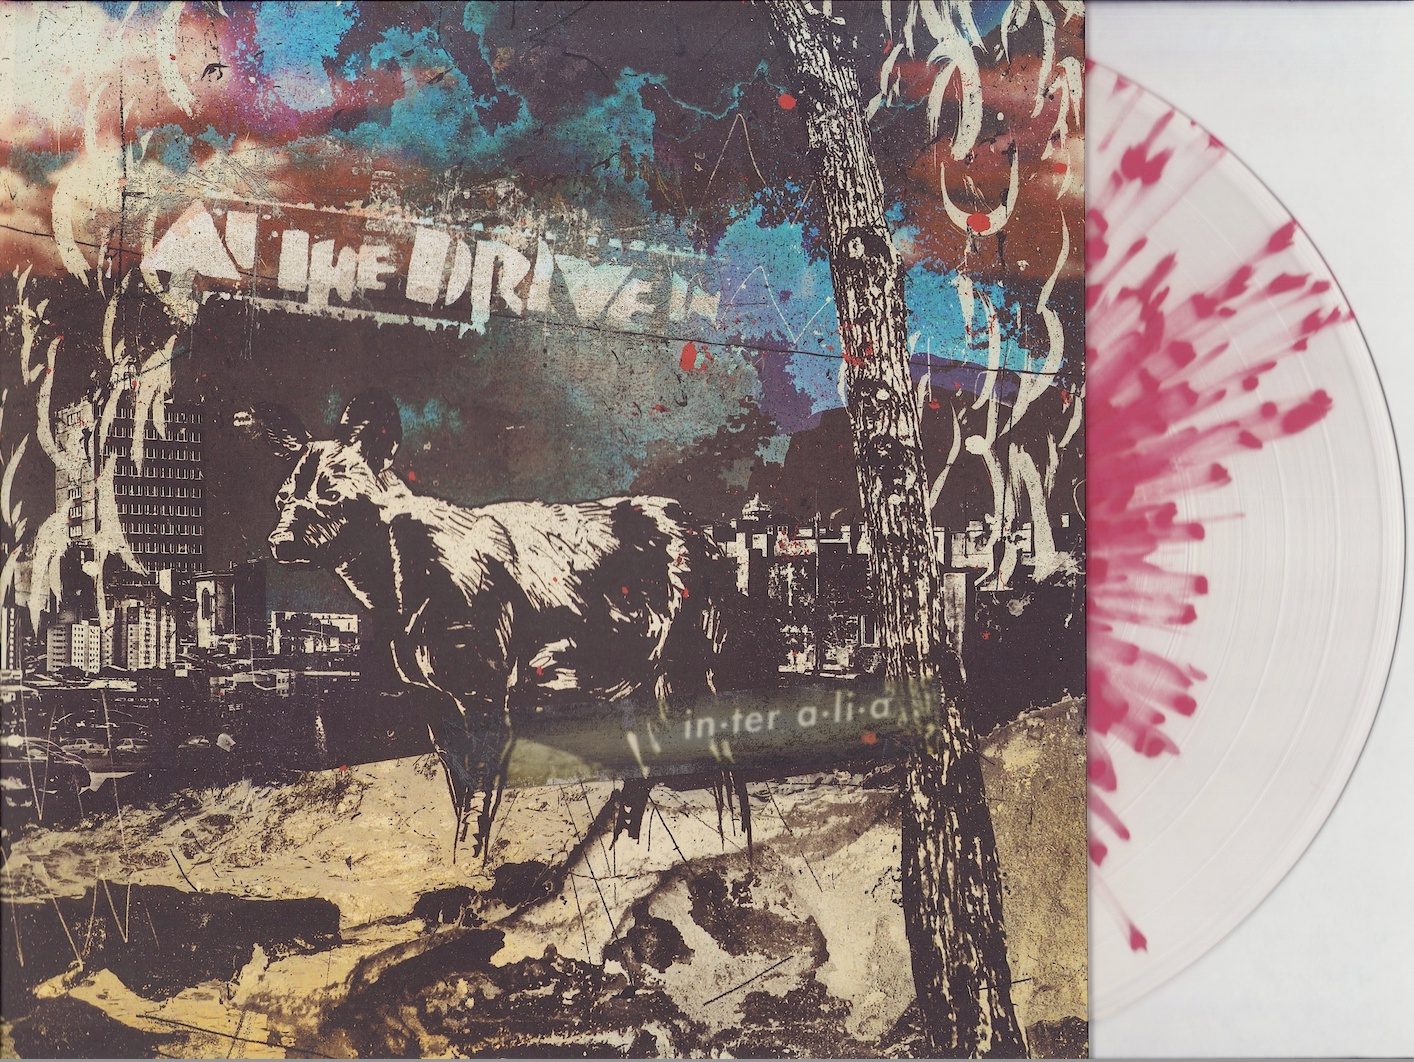 At The Drive-In ‎- in•ter a•li•a Clear w/ Grimace Splatter Vinyl LP